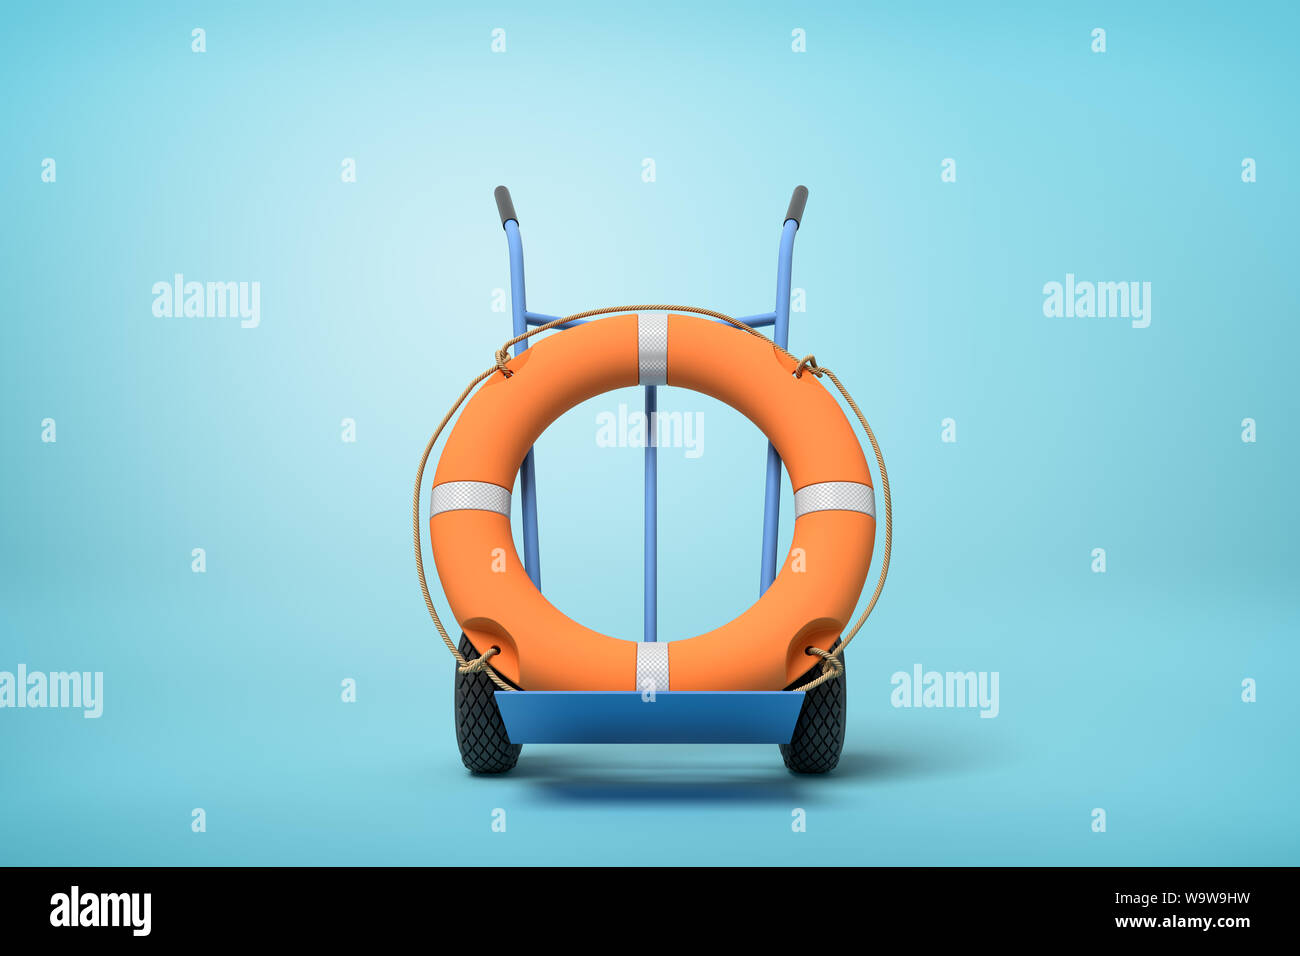 3d rendering of an orange boat lifebuoy on a hand truck on blue background Stock Photo